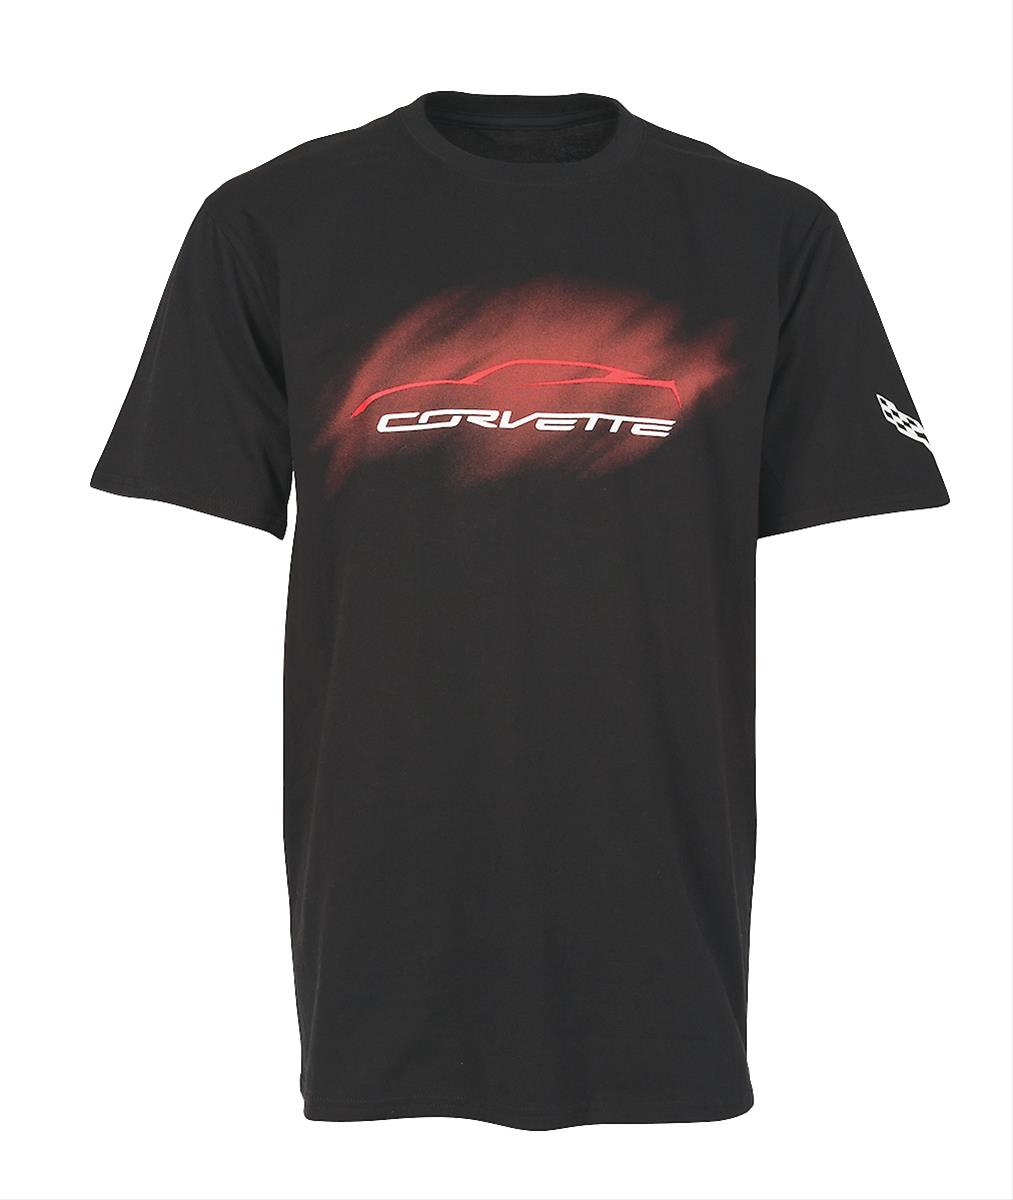 C7 Corvette Silhouette T-Shirt - Free Shipping on Orders Over $99 at ...